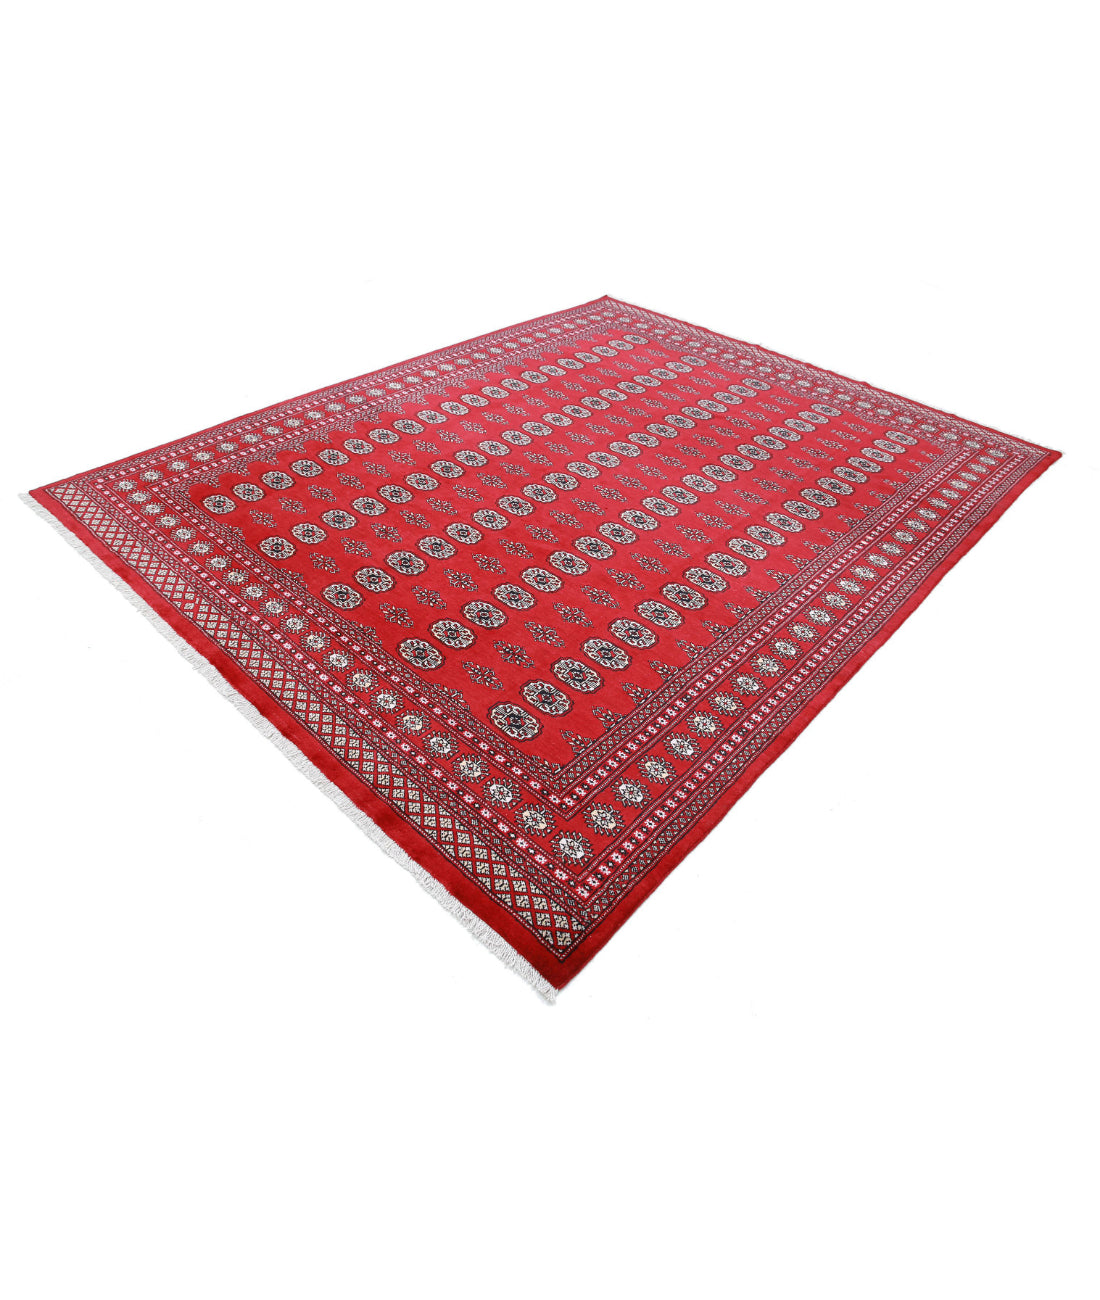 Hand Knotted Tribal Bokhara Wool Rug - 7'10'' x 9'11'' 7'10'' x 9'11'' (235 X 298) / Red / Beige